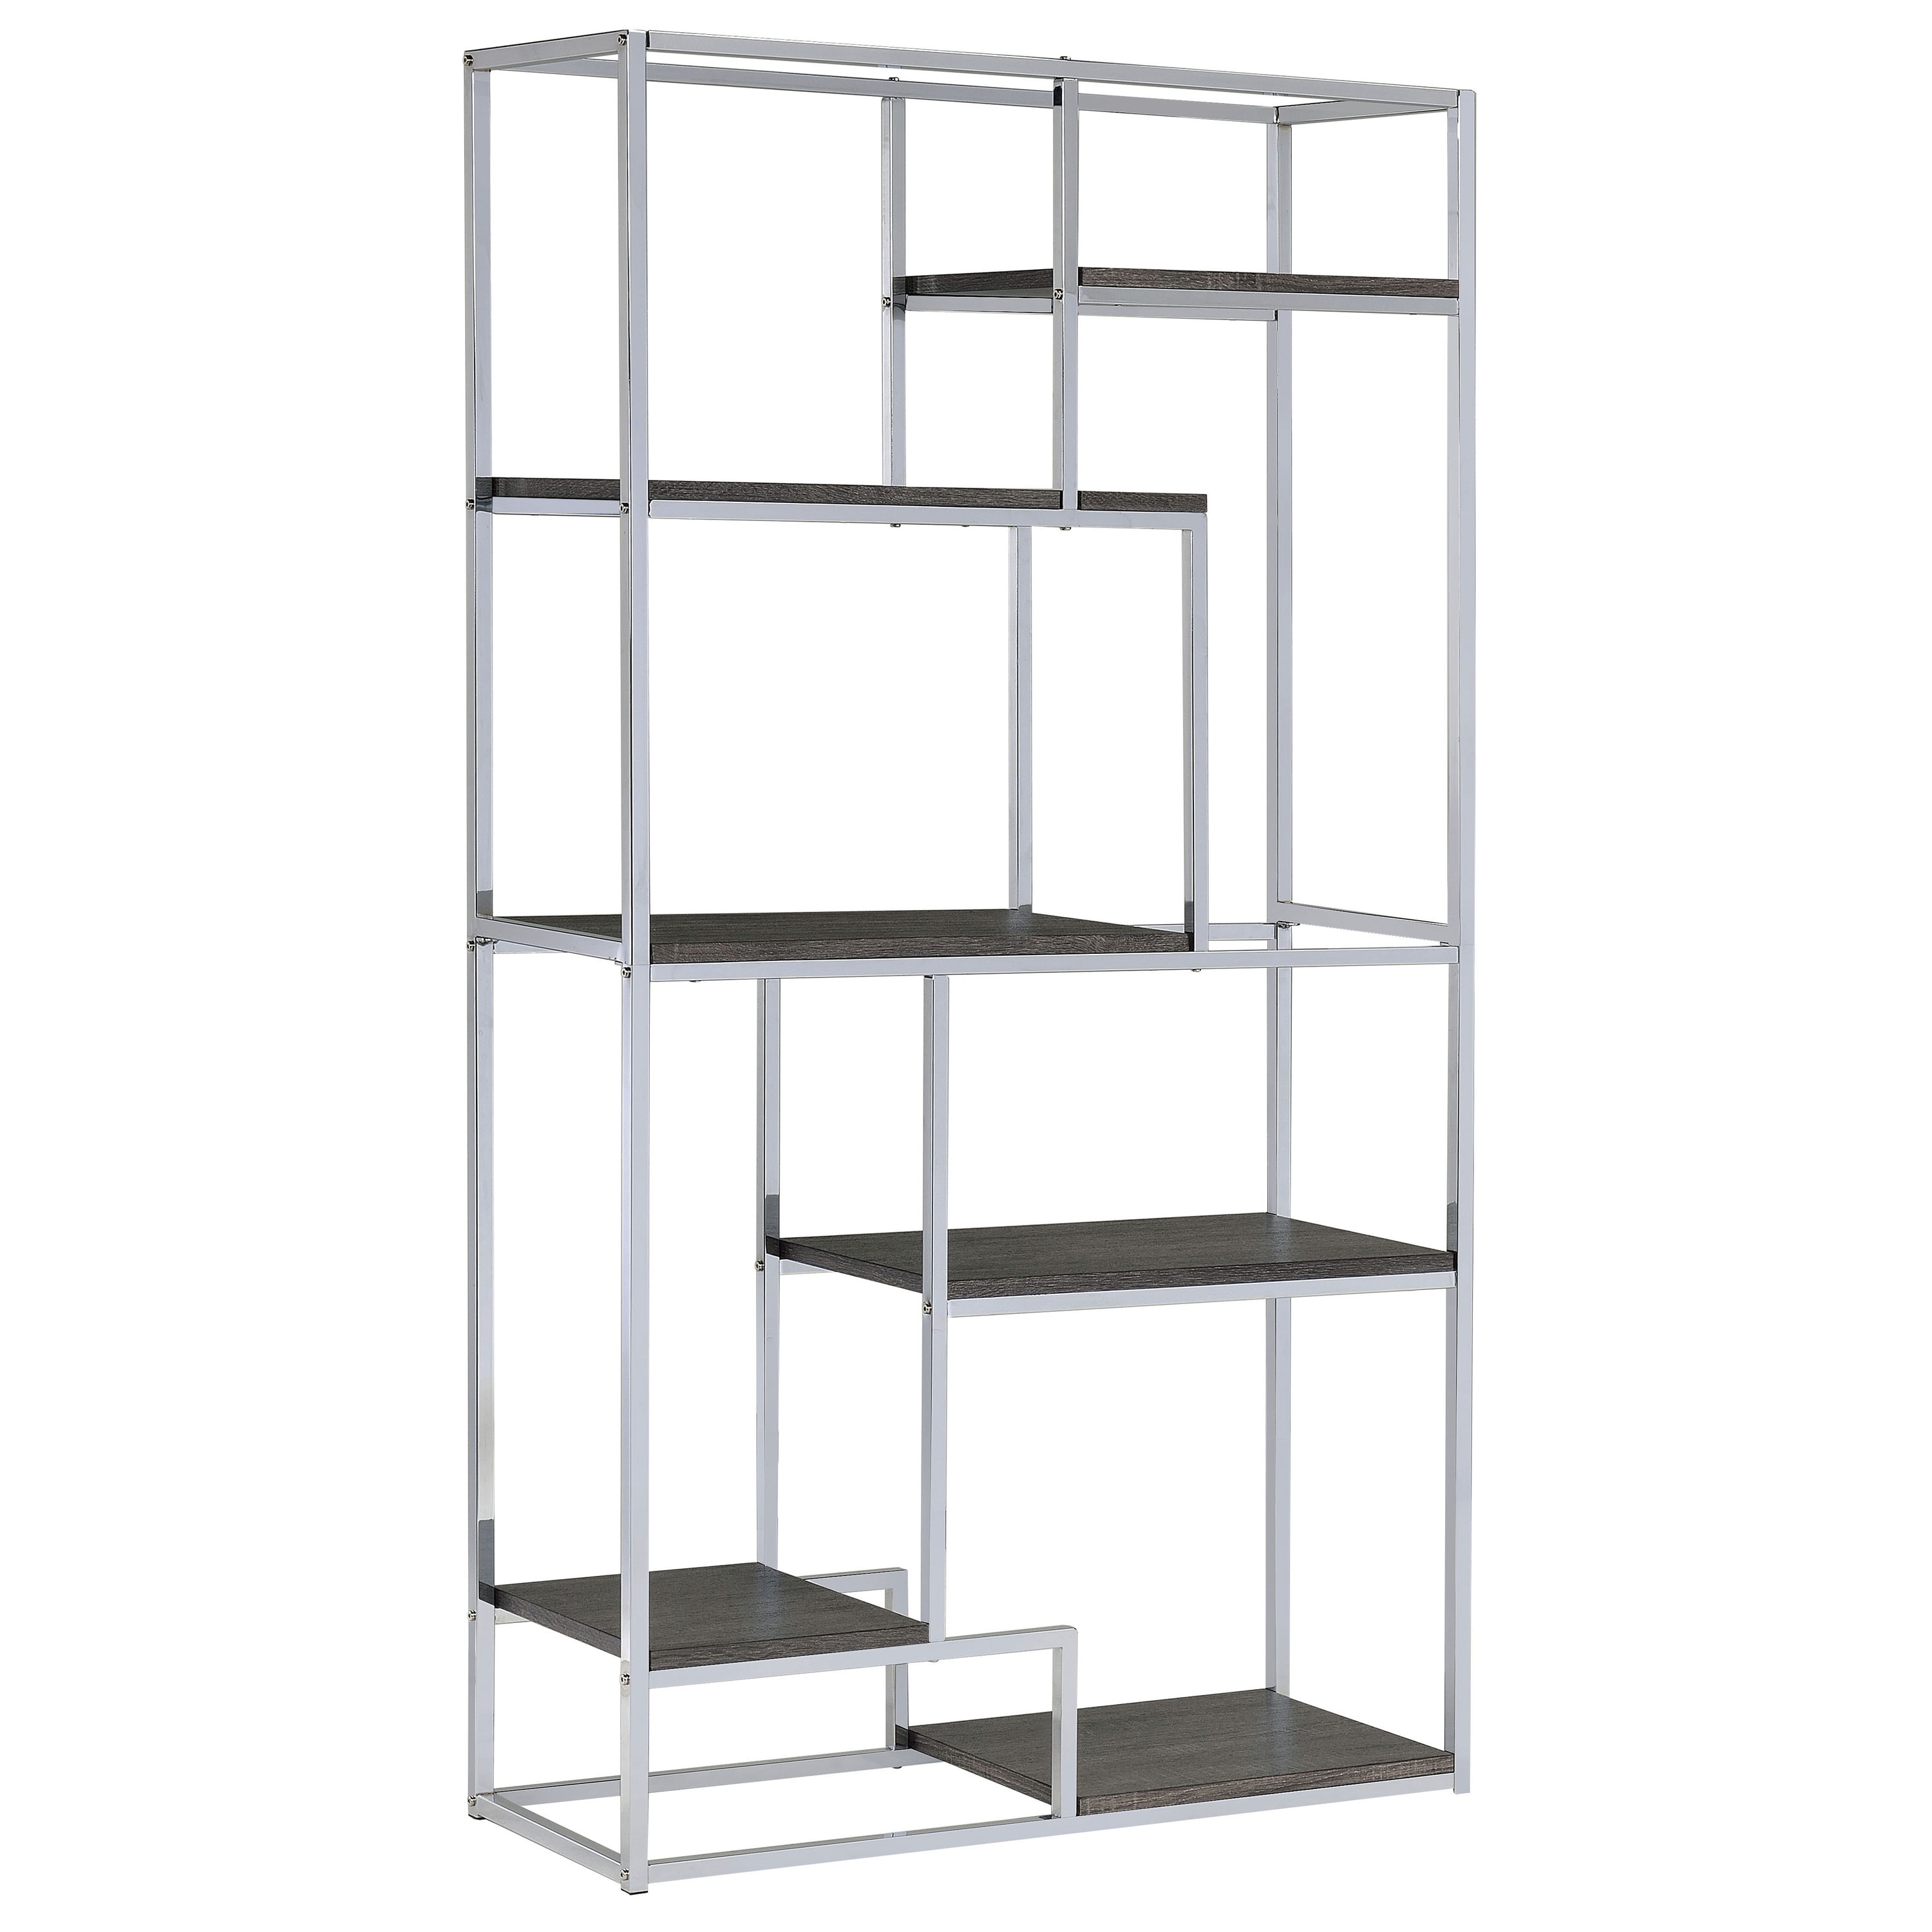 Furniture Of America Nenzel Chrome, Pieces Of Furniture With Many Shelves